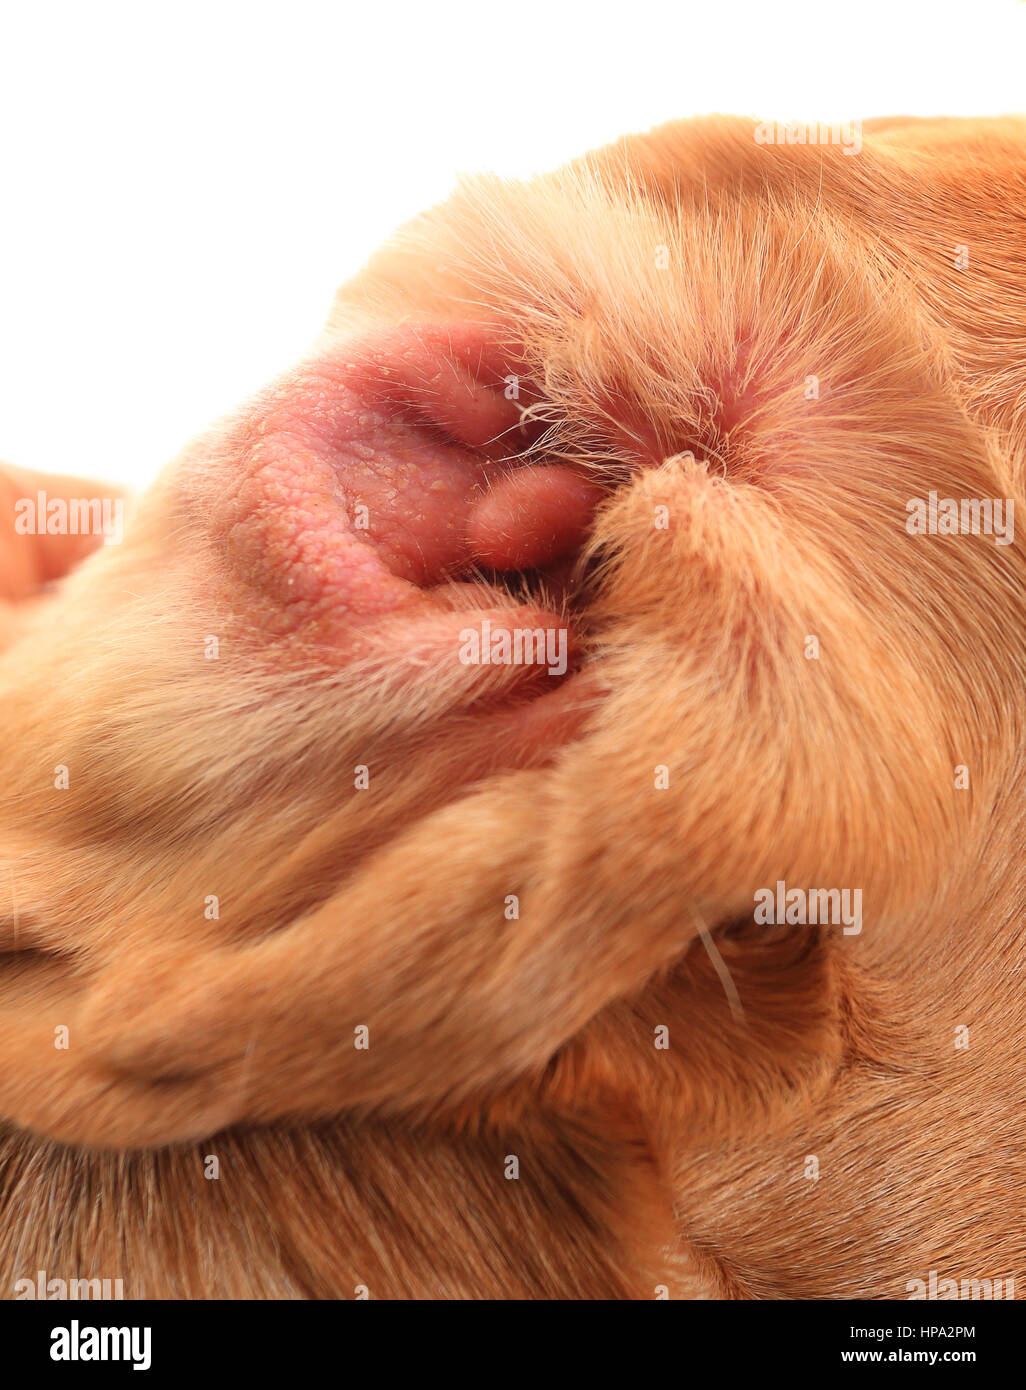 Red ear of with allergy. Allergy on beagle ear. Allergy on dog ear close up Stock Photo - Alamy